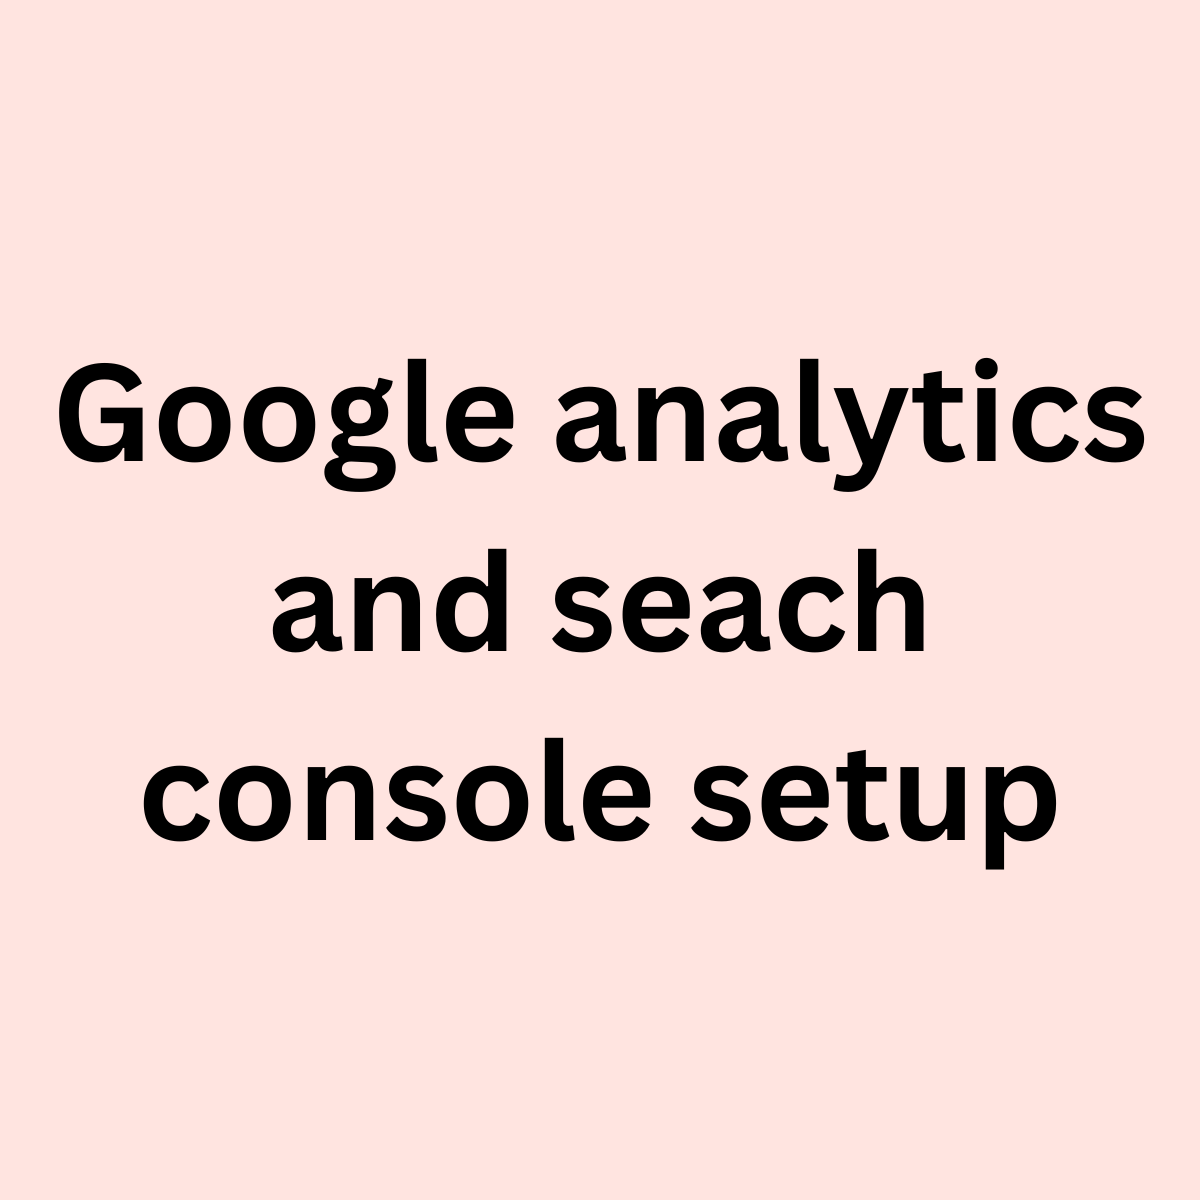 Google analytics and search console setup